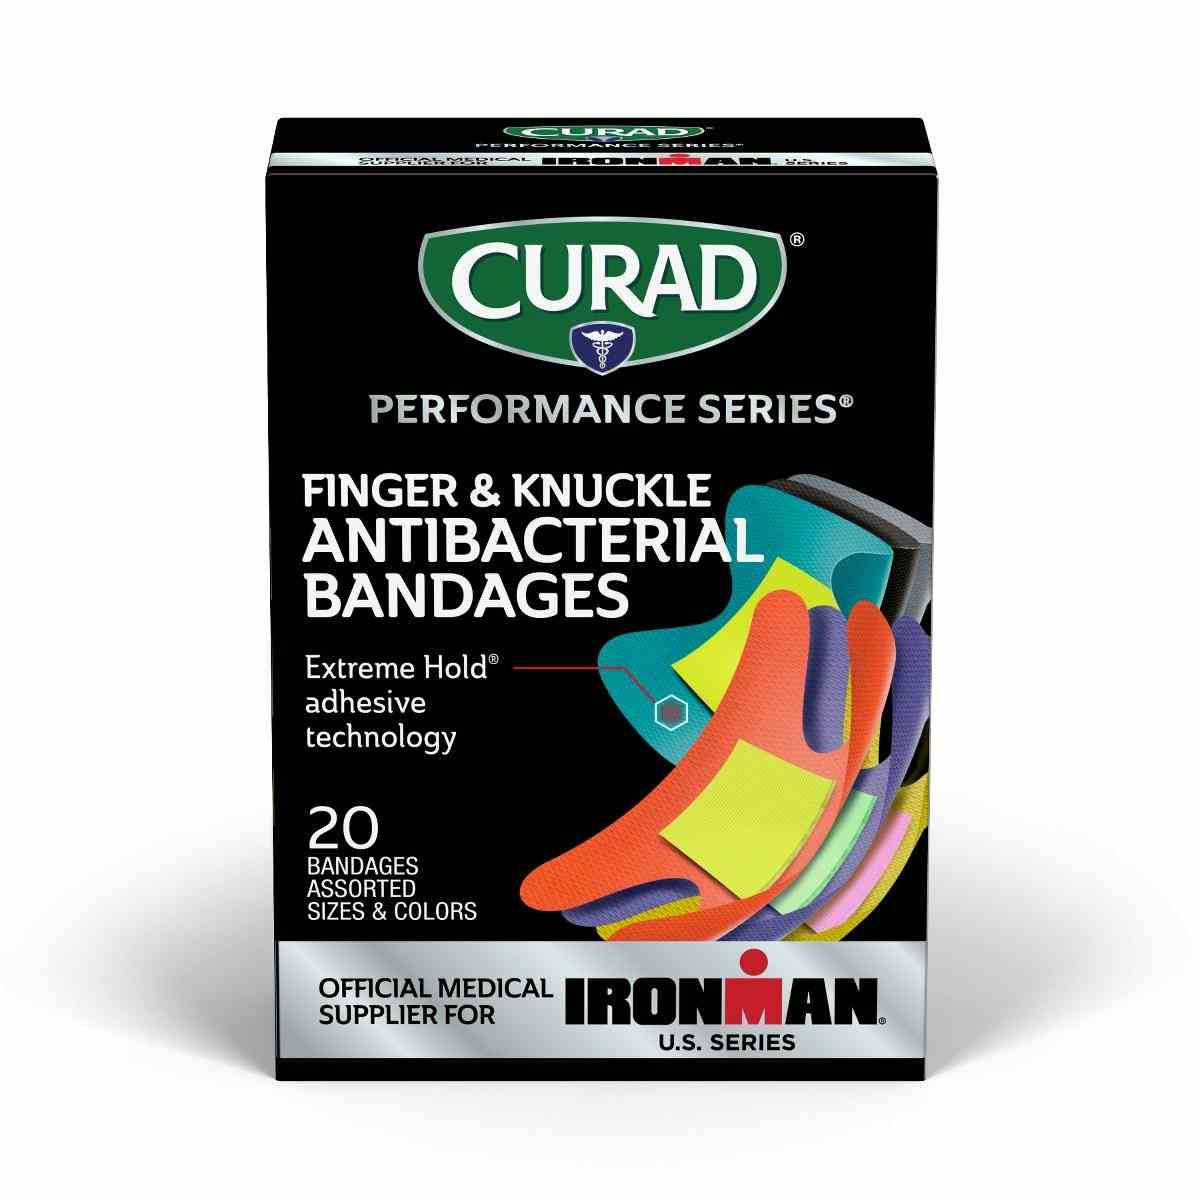 Curad Performance Series IRONMAN Finger and Knuckle Antibacterial Bandages, CURIM5021H, Box of 20 